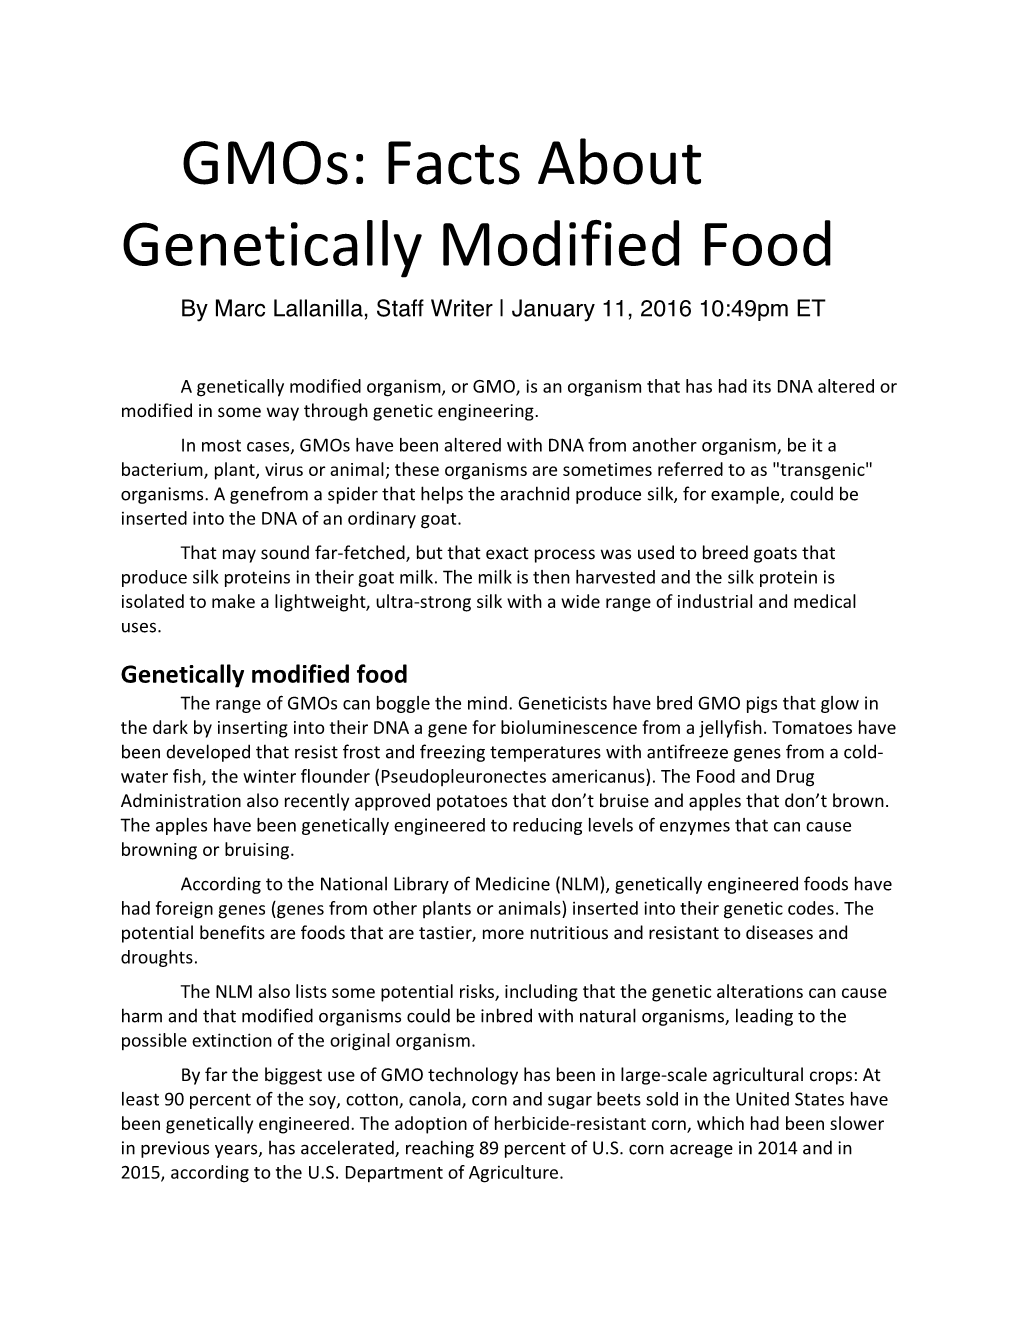 Gmos: Facts About Genetically Modified Food by Marc Lallanilla, Staff Writer | January 11, 2016 10:49Pm ET